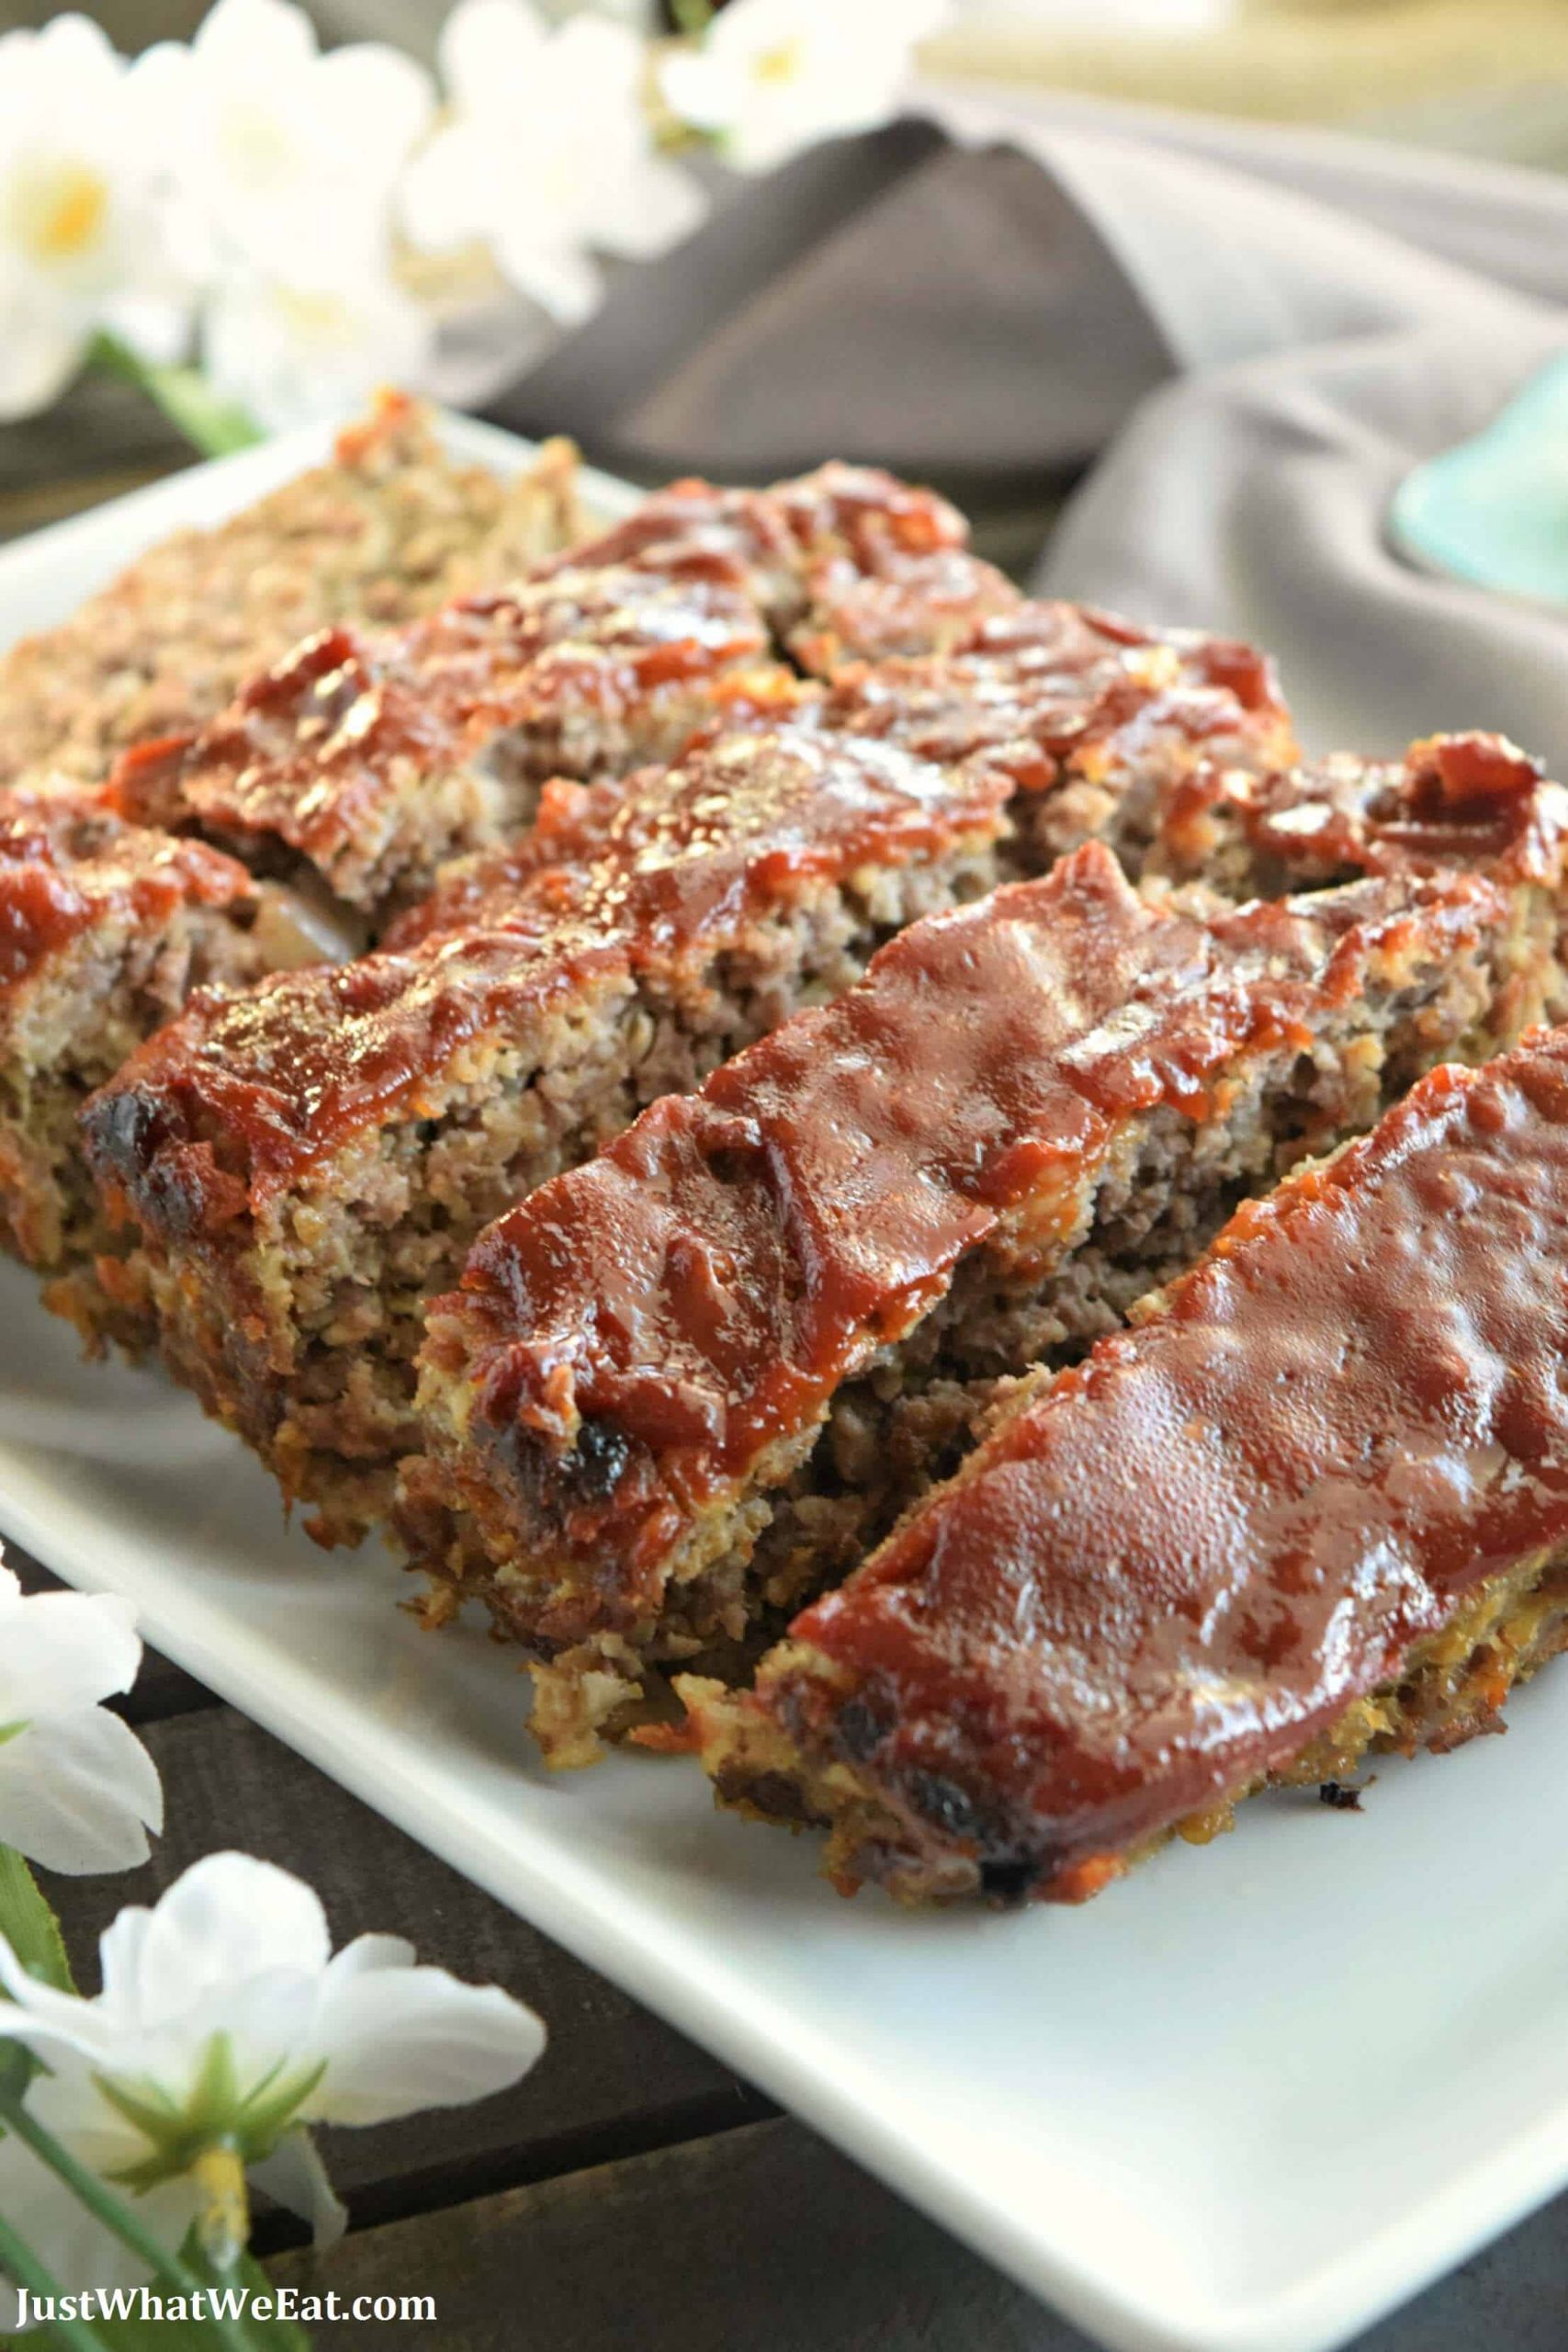 Dairy Free Egg Free Recipes
 Turkey or Beef Meatloaf Gluten Free Dairy Free & Egg